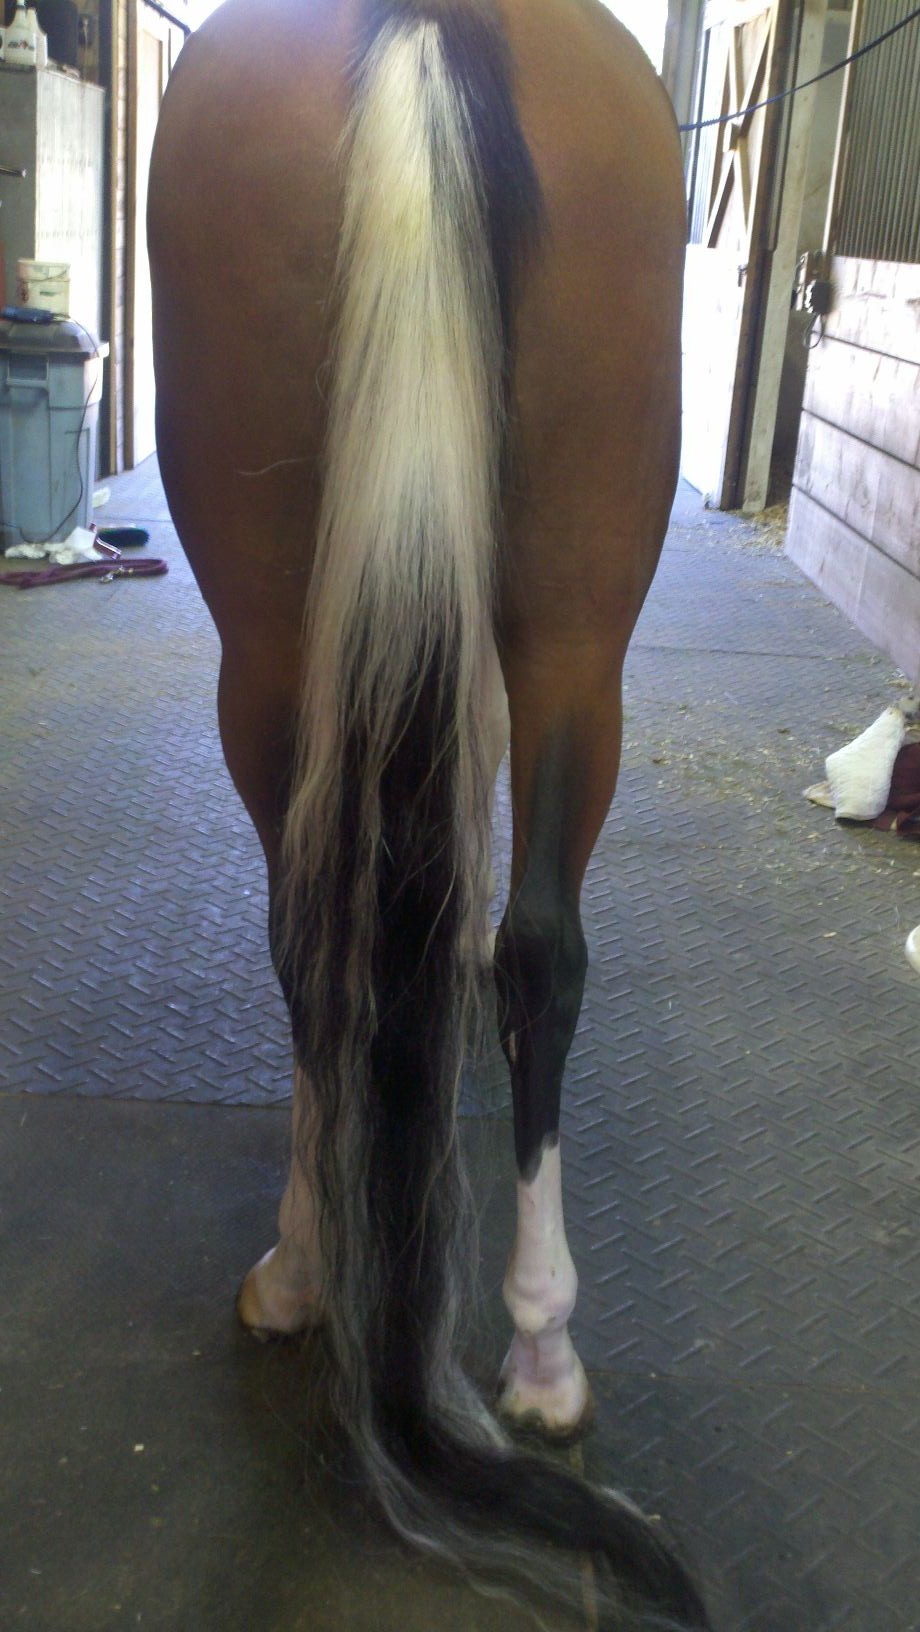 Preparing a Show Tail for Pasture